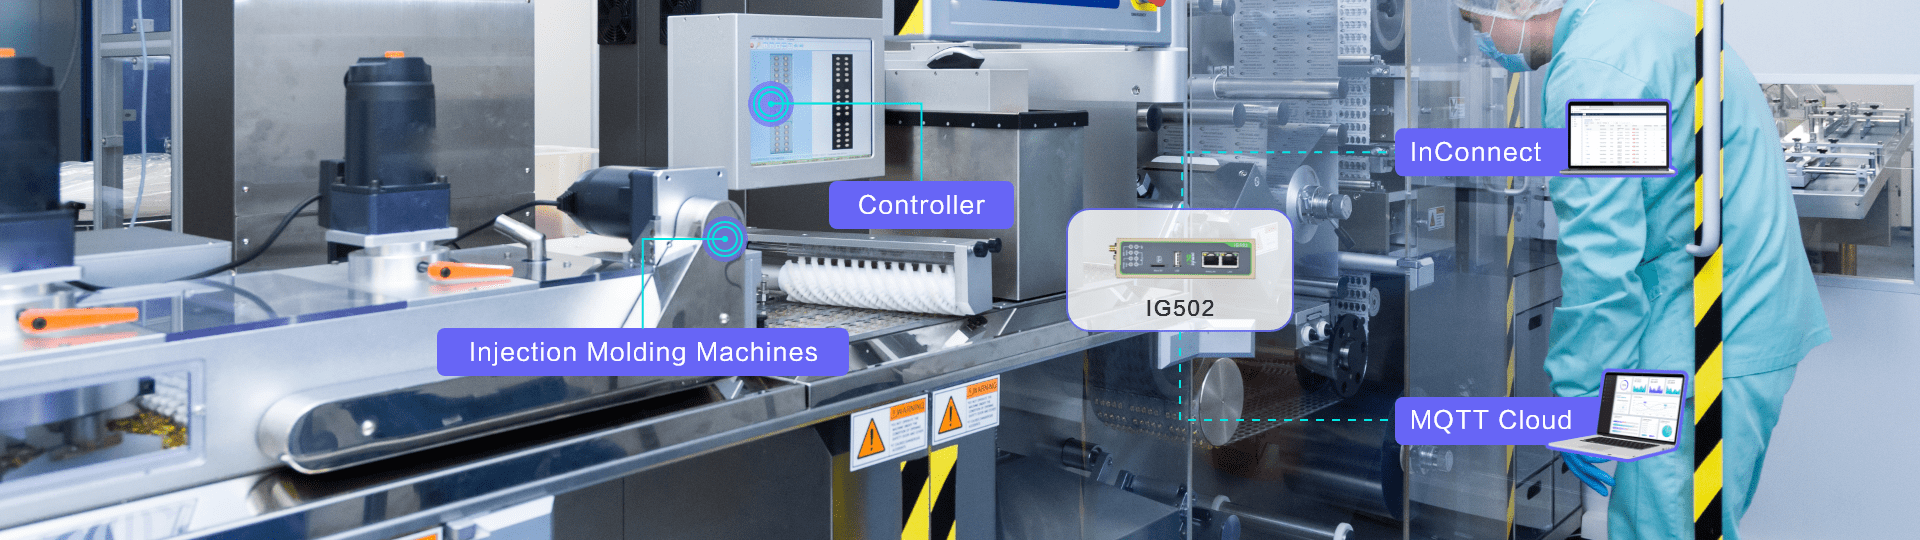 InHand's Remote Monitoring Solution for Injection Molding Machines